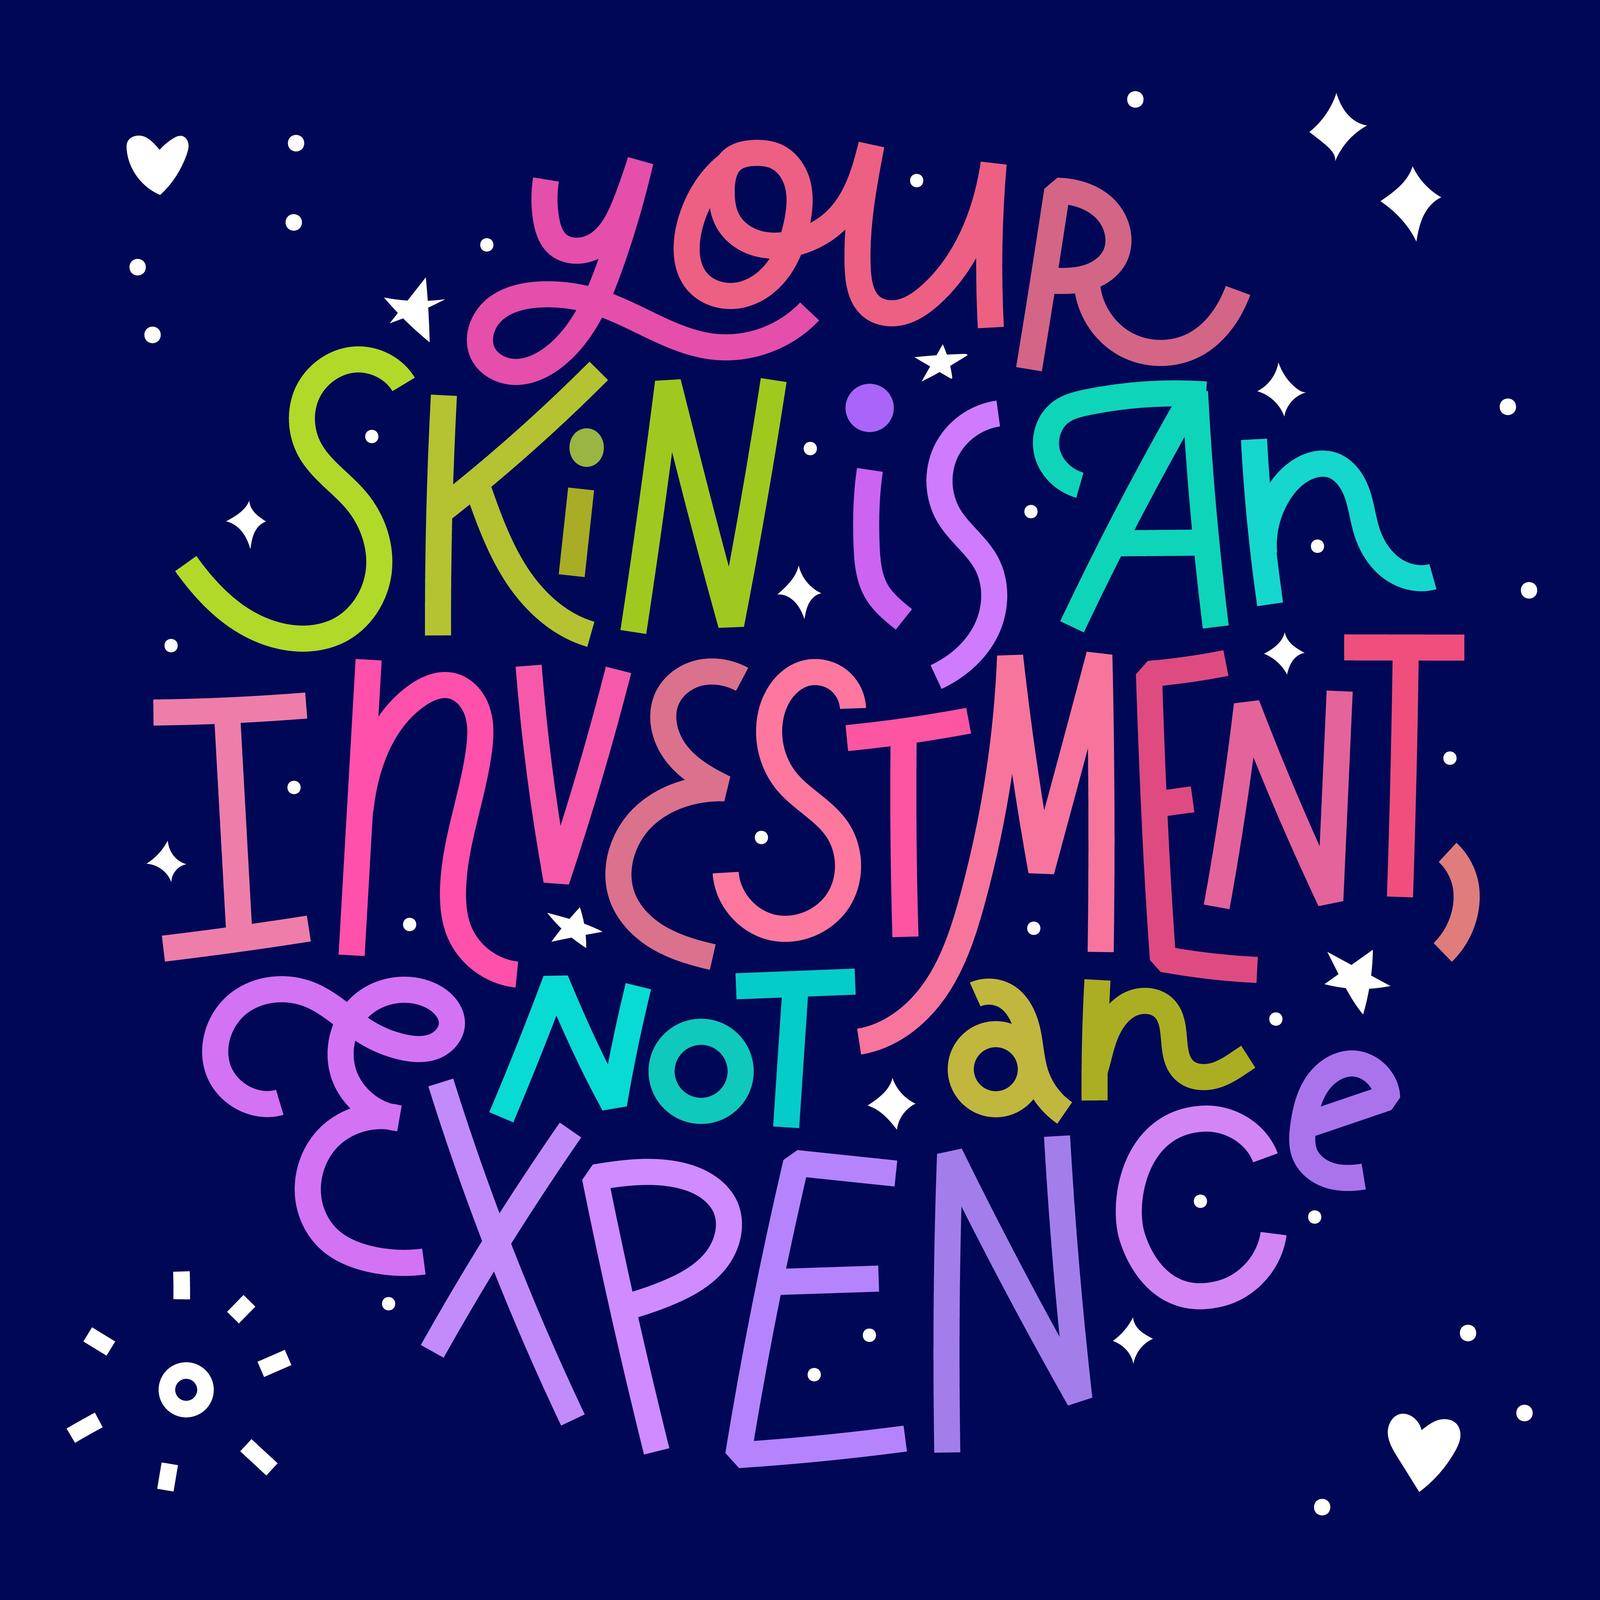 Your skin is an investment, not an expence by chickfishdoodles